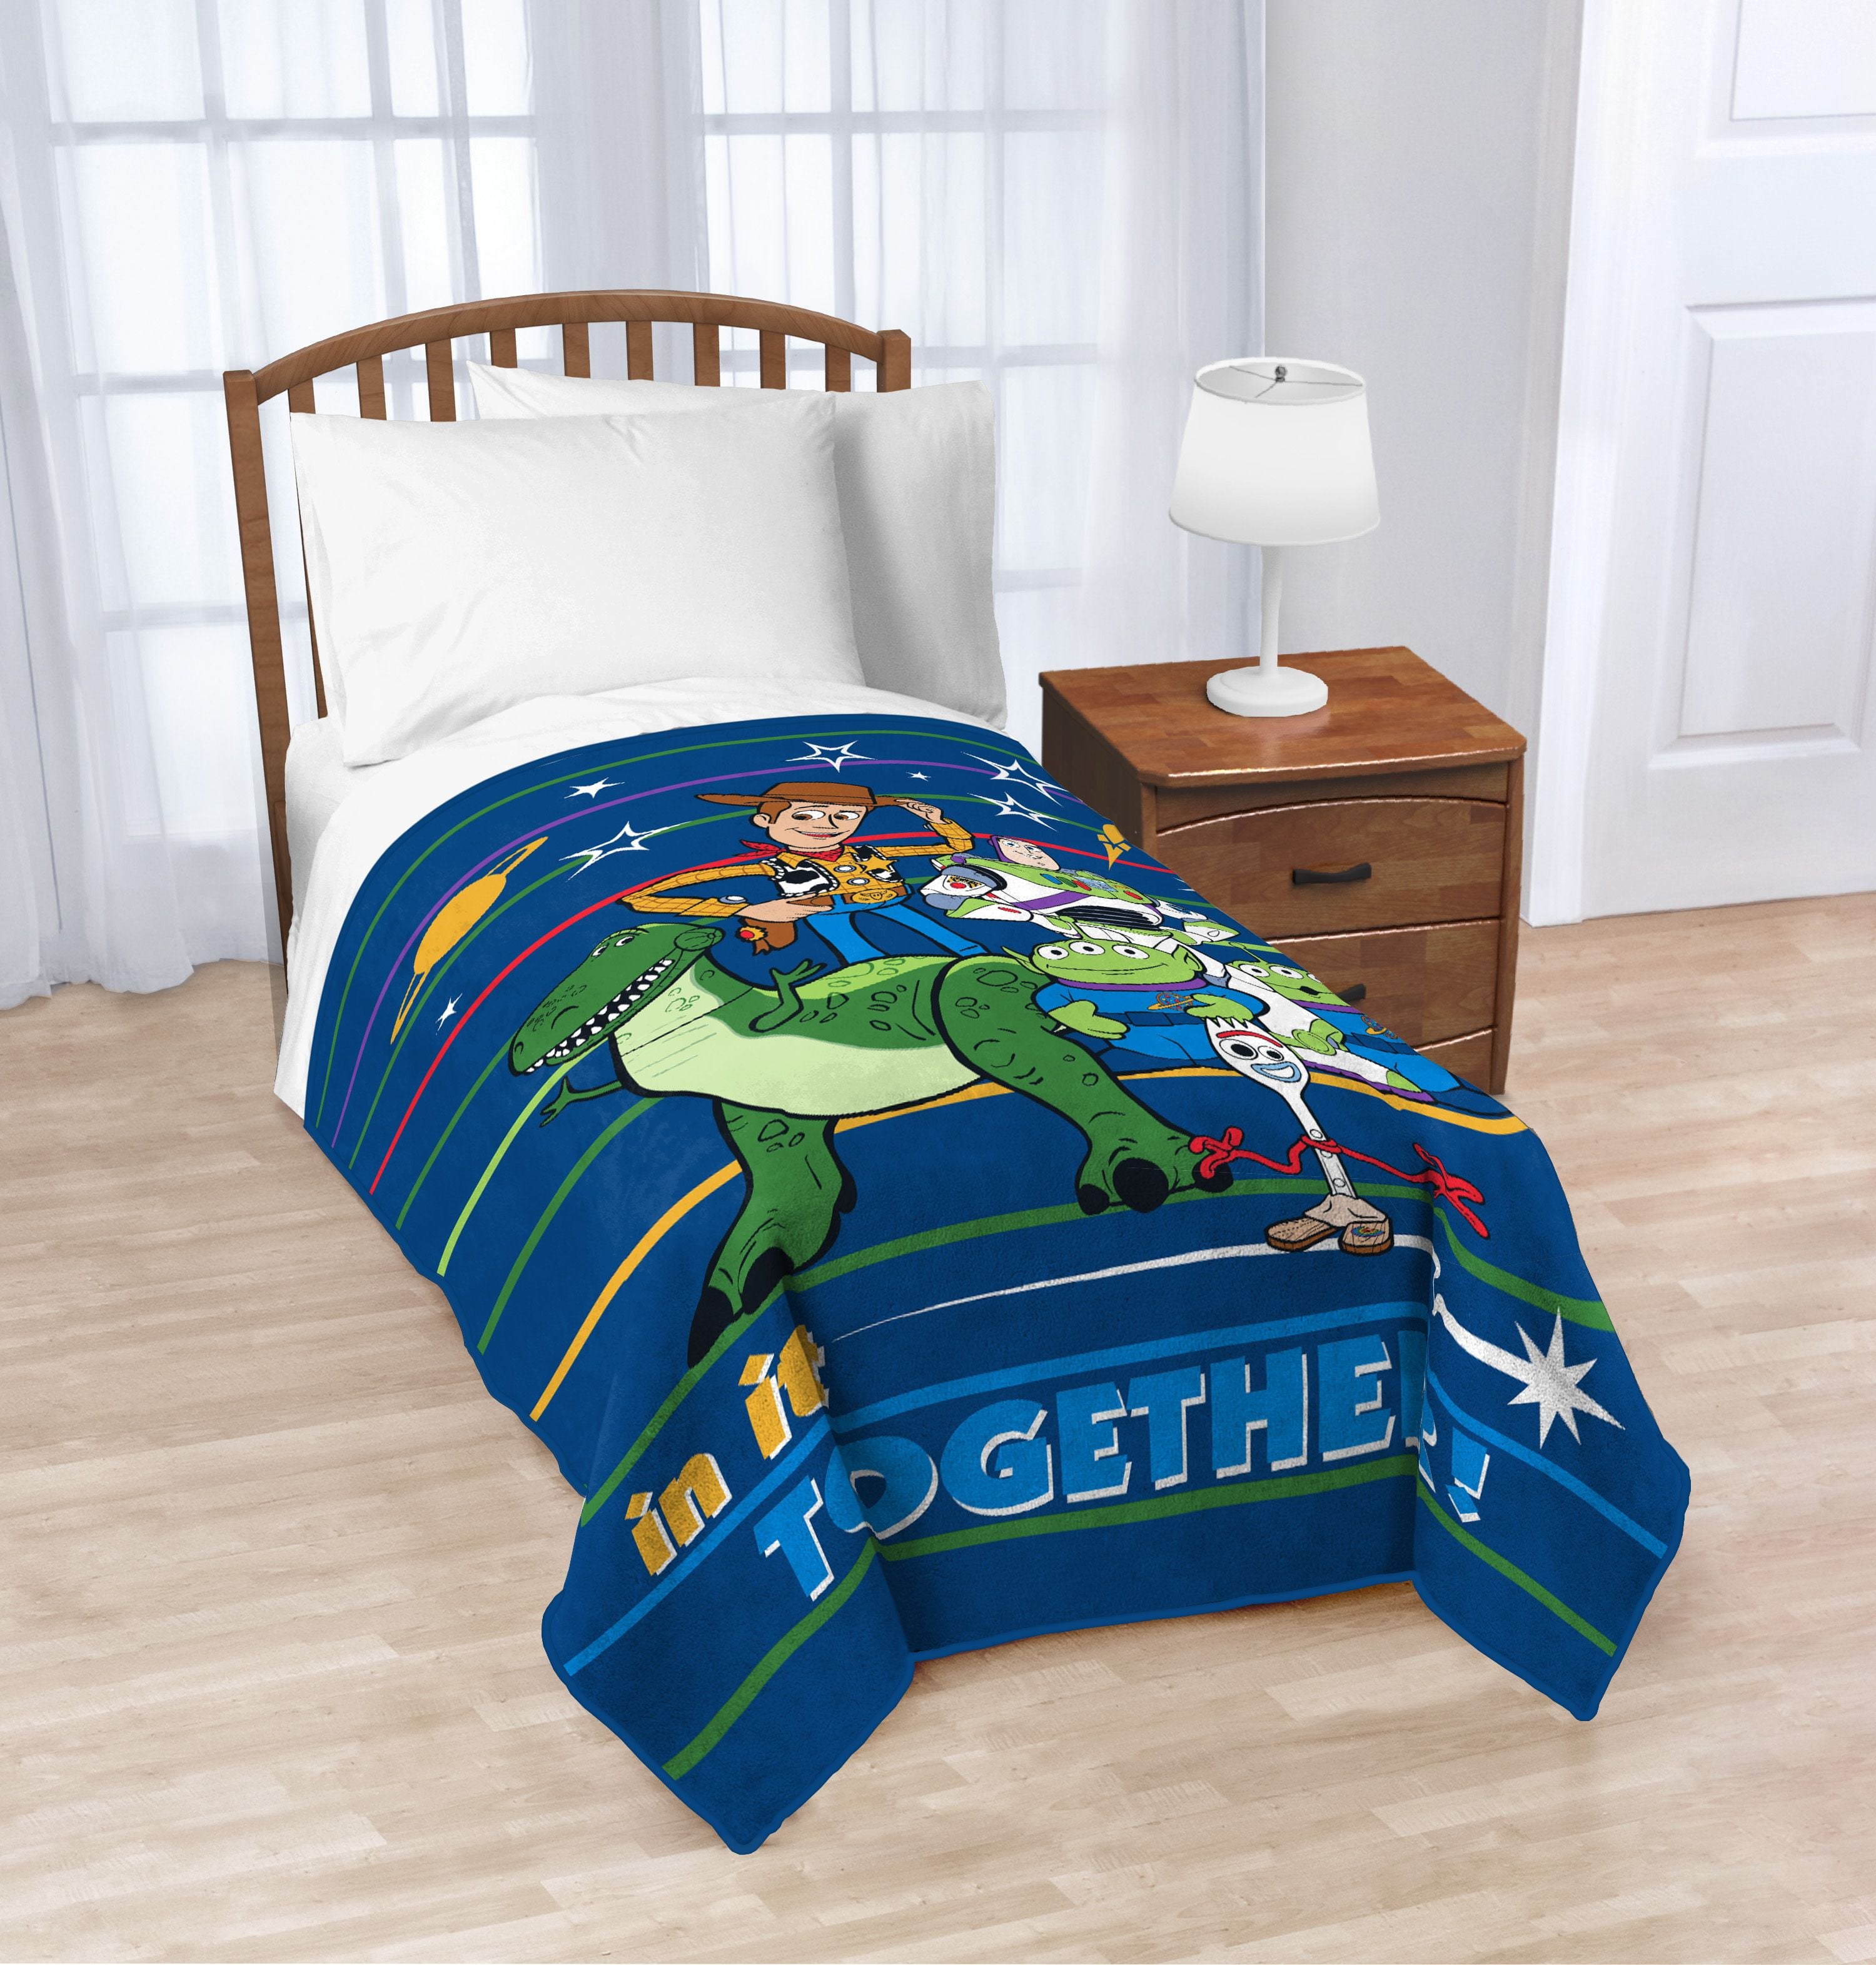 Woody DWSM Toy Story 4 Fleece Throw,Blue Forky Buzz Lightyear Design Baby Blanket,Super Soft Blanket,Perfect for Any Bedroom 1,130 * 150CM 